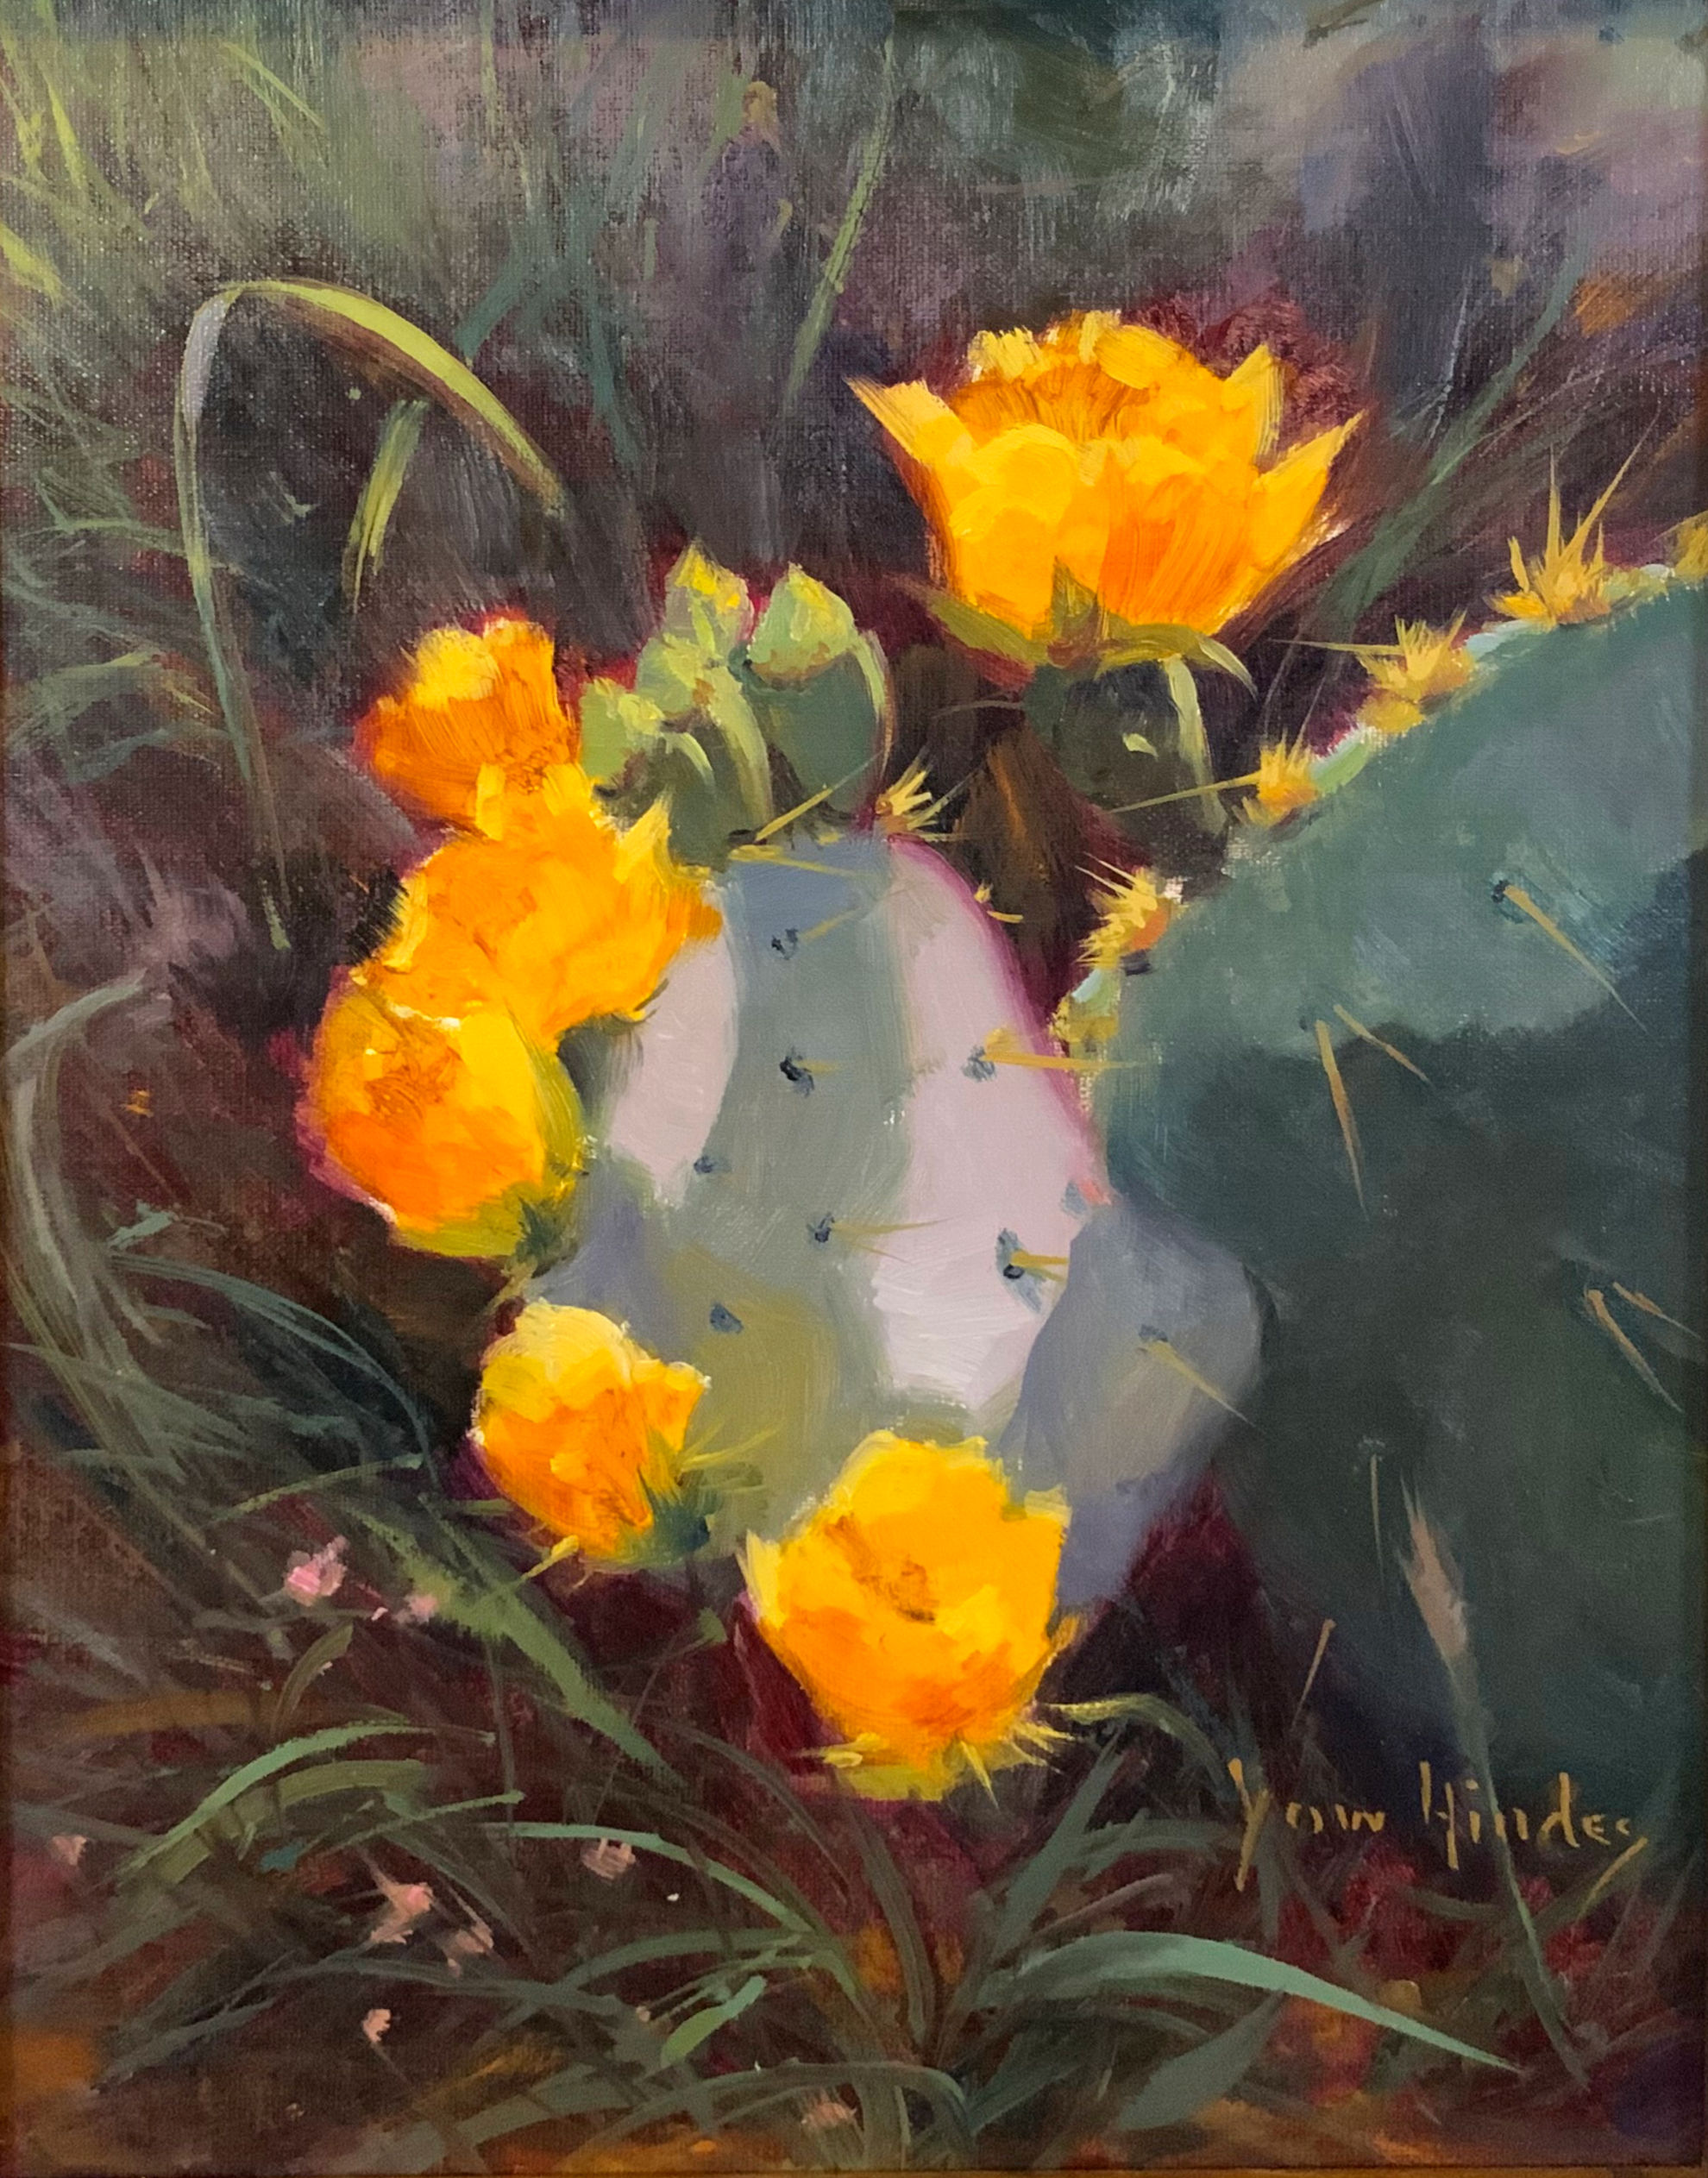 The Yellow Rose of Texas Art Piece available at Hindes Fine Art Gallery